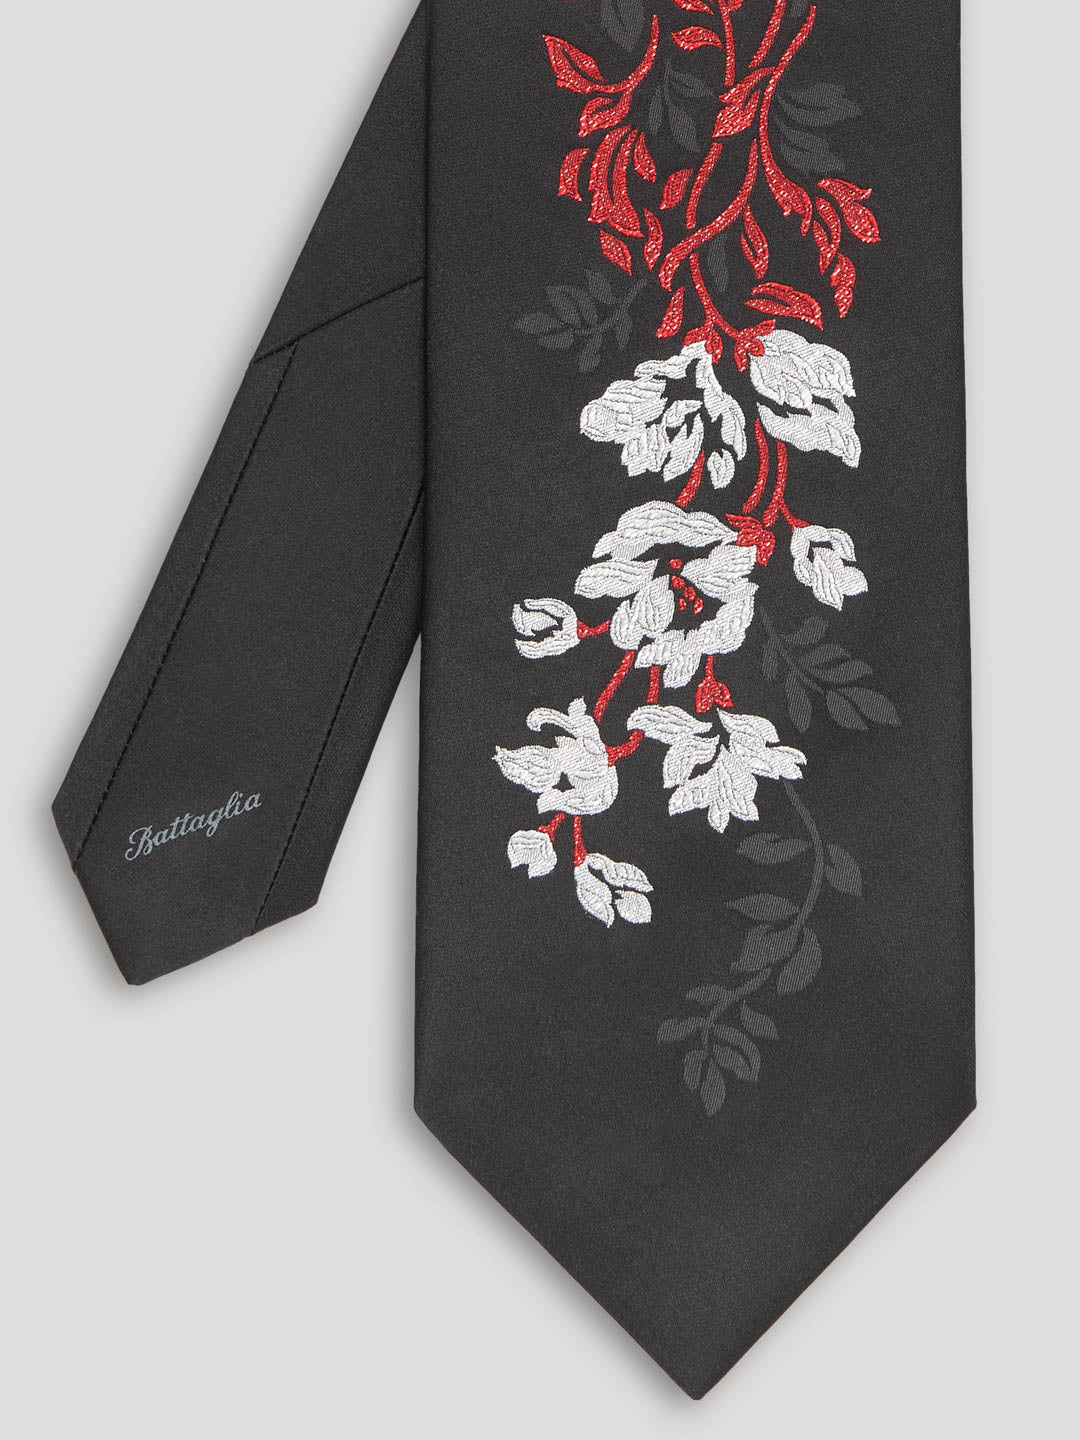 Black tie with silver and red woven floral details. 